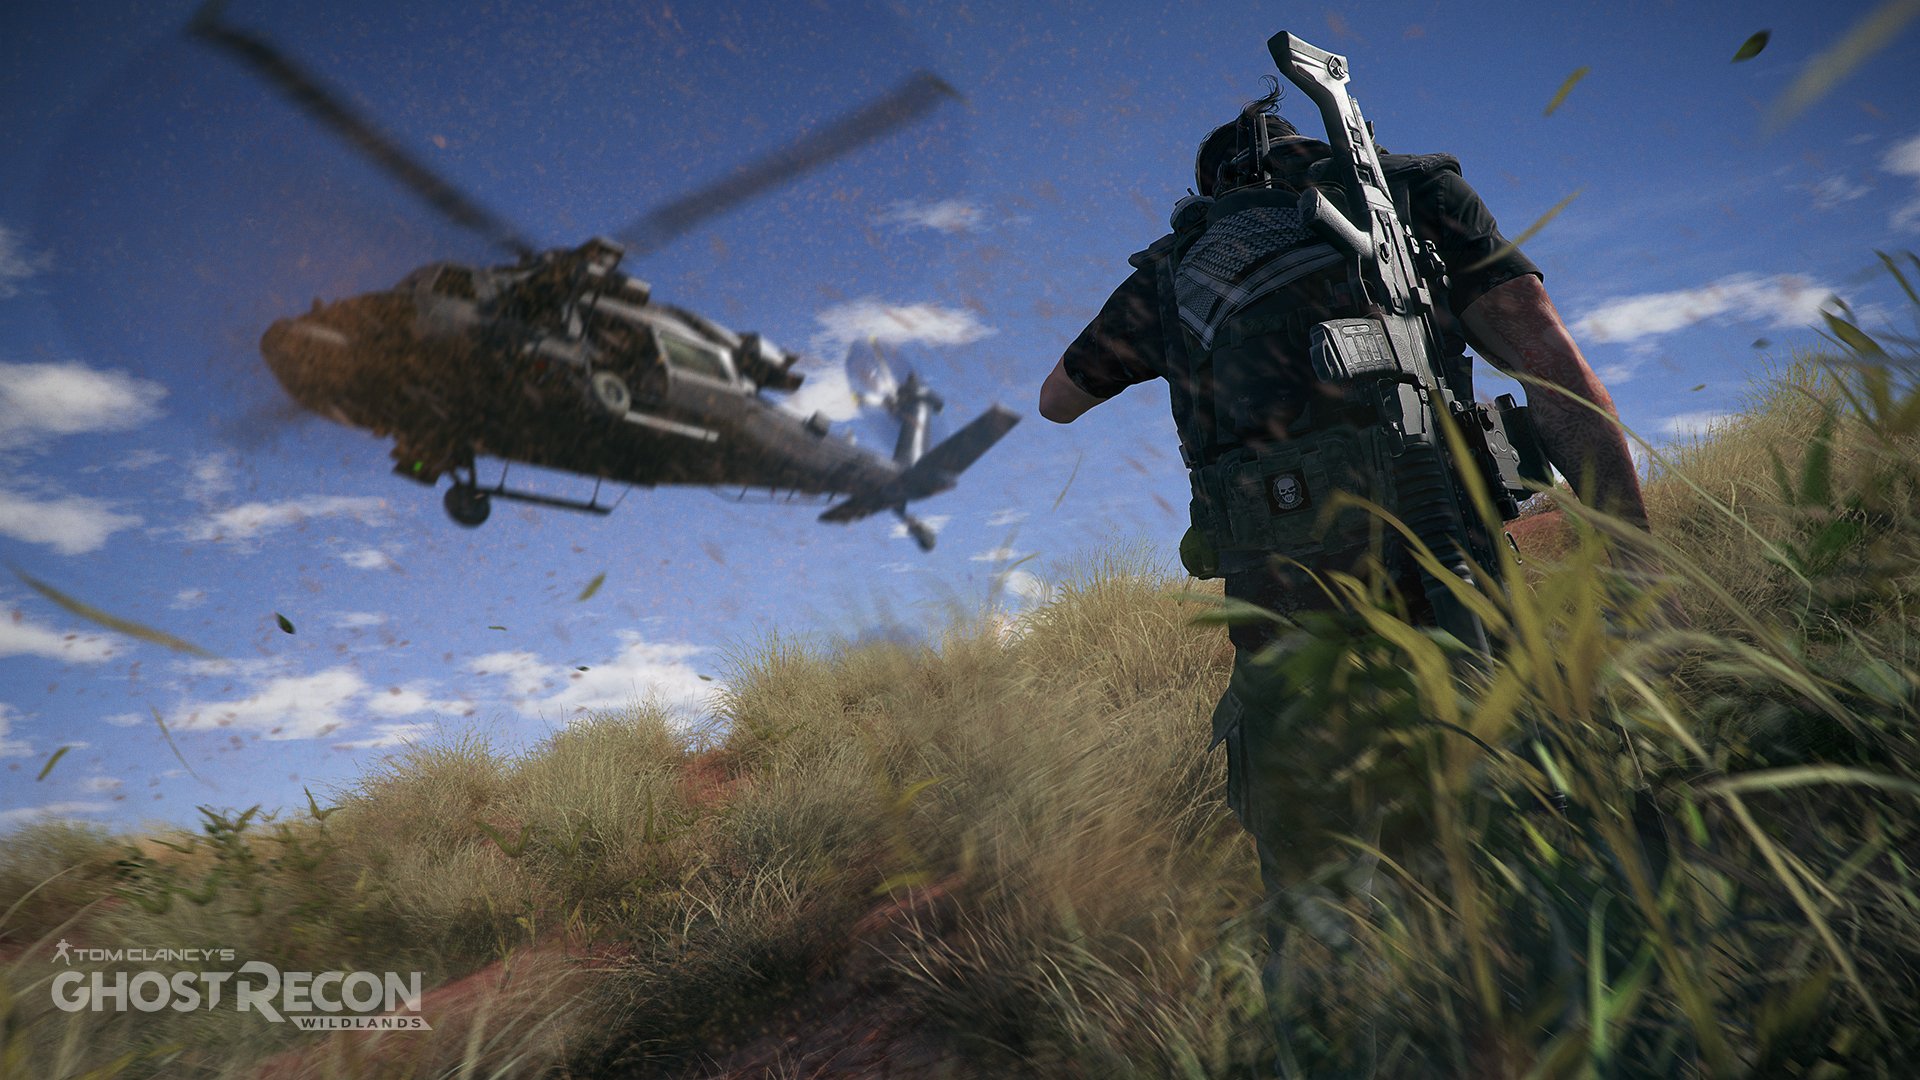 Ubisoft: Ghost Recon Wildlands Remains The Industry's Best Selling